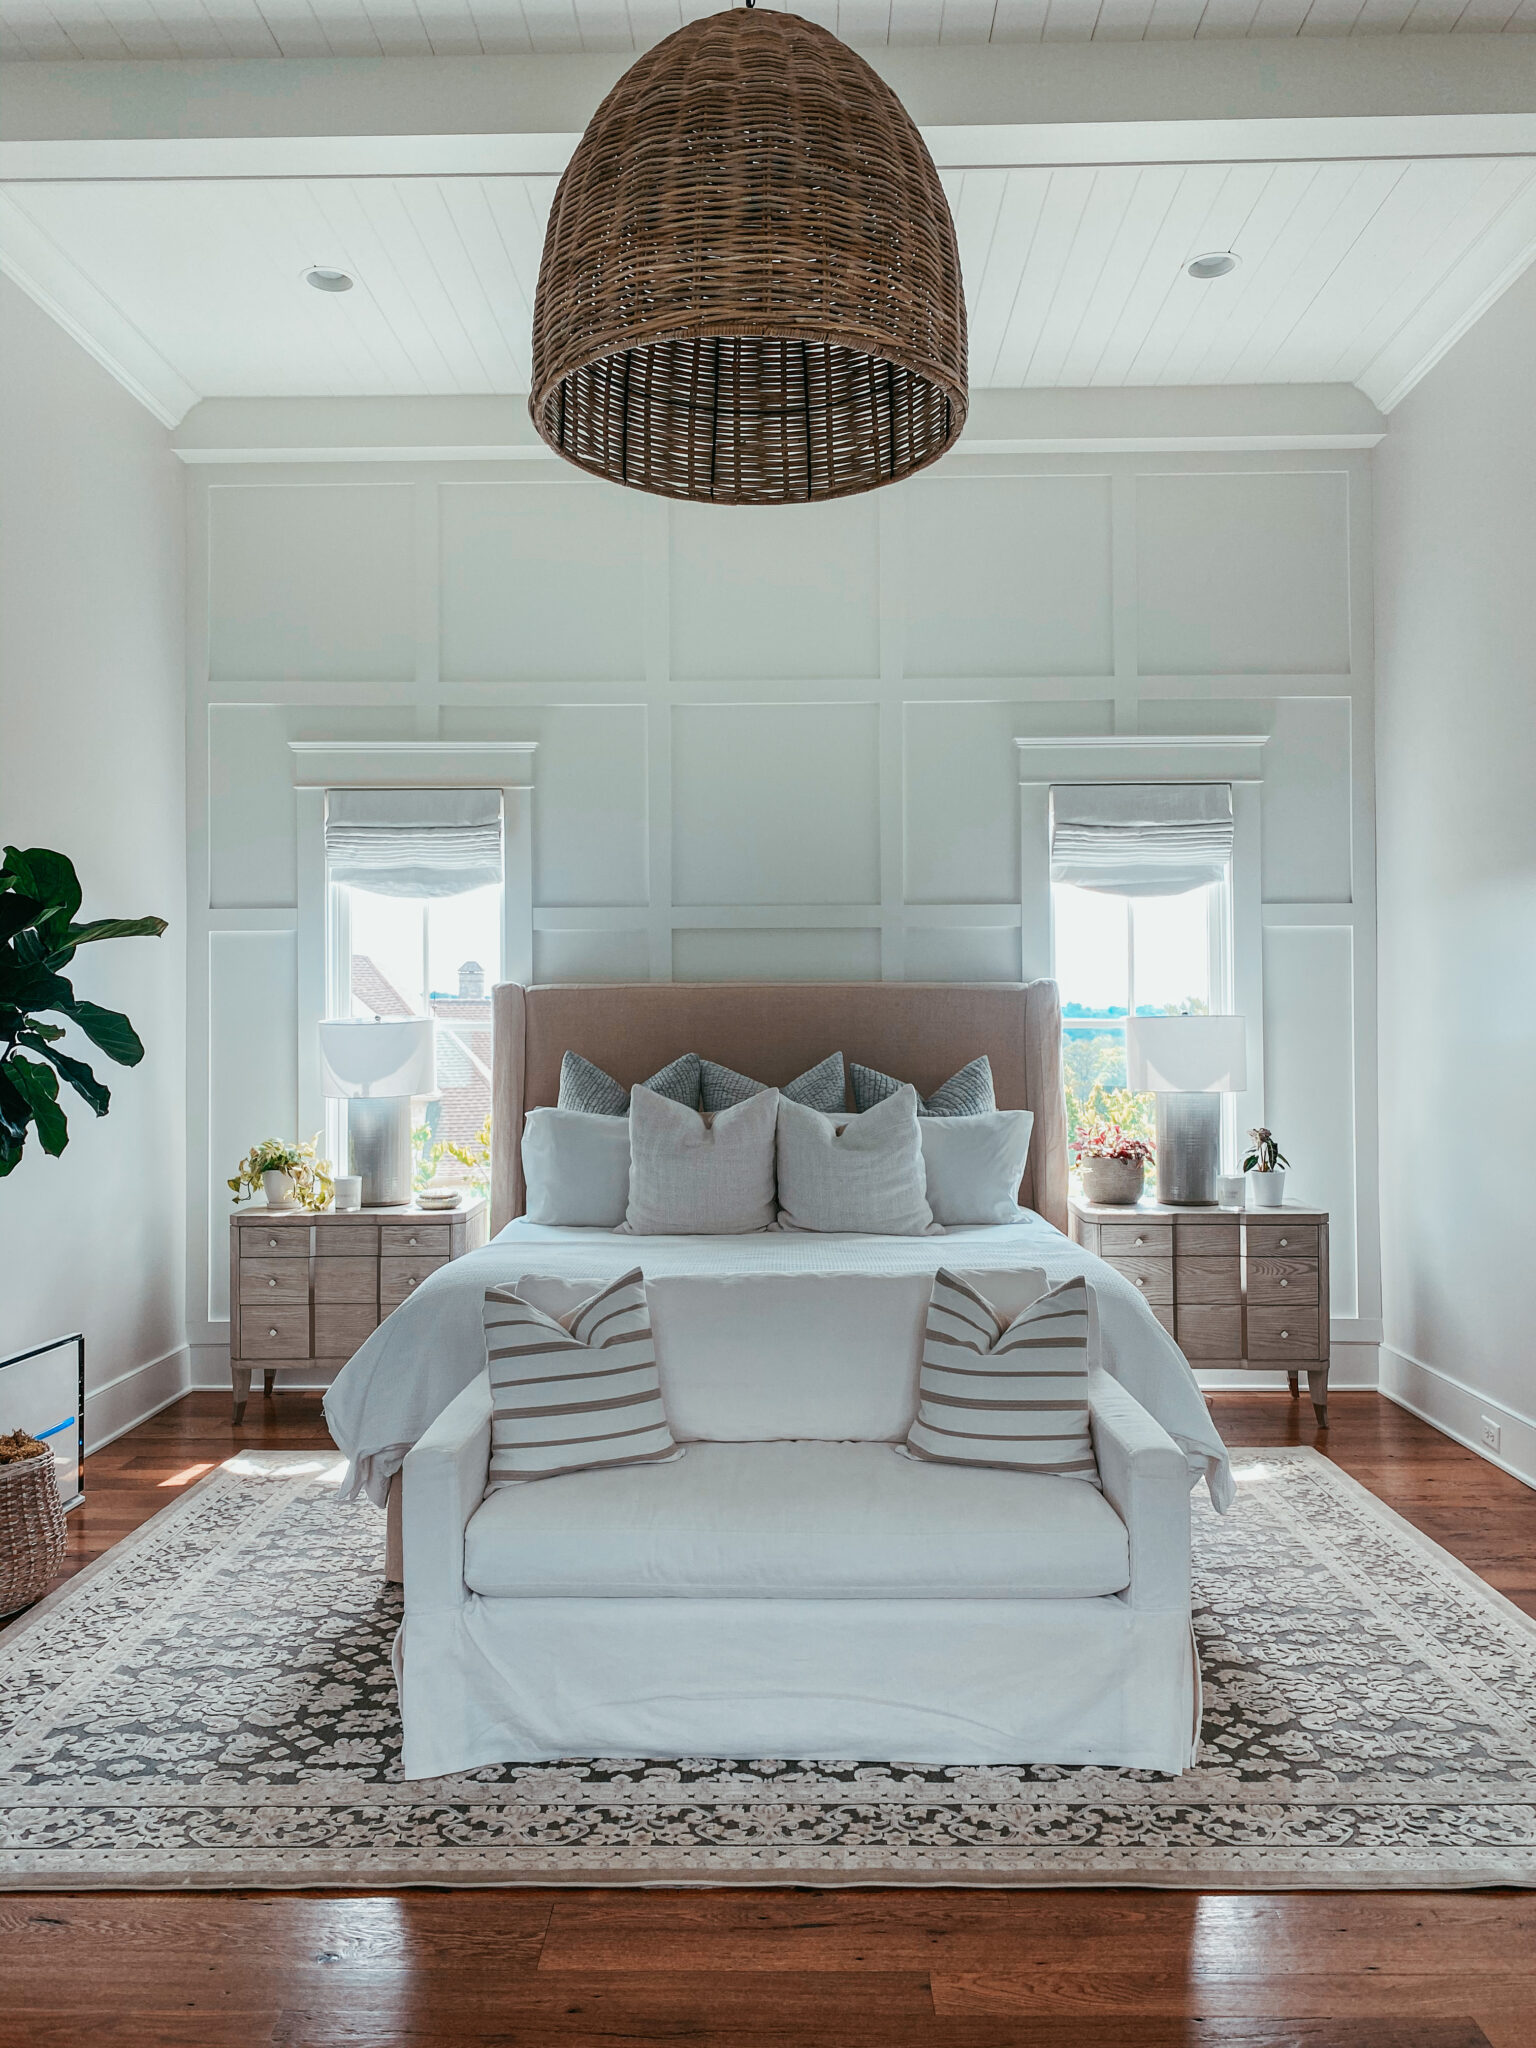 How to Create a 5-Star Resort Worthy Bed - Hello Gorgeous, by Angela Lanter